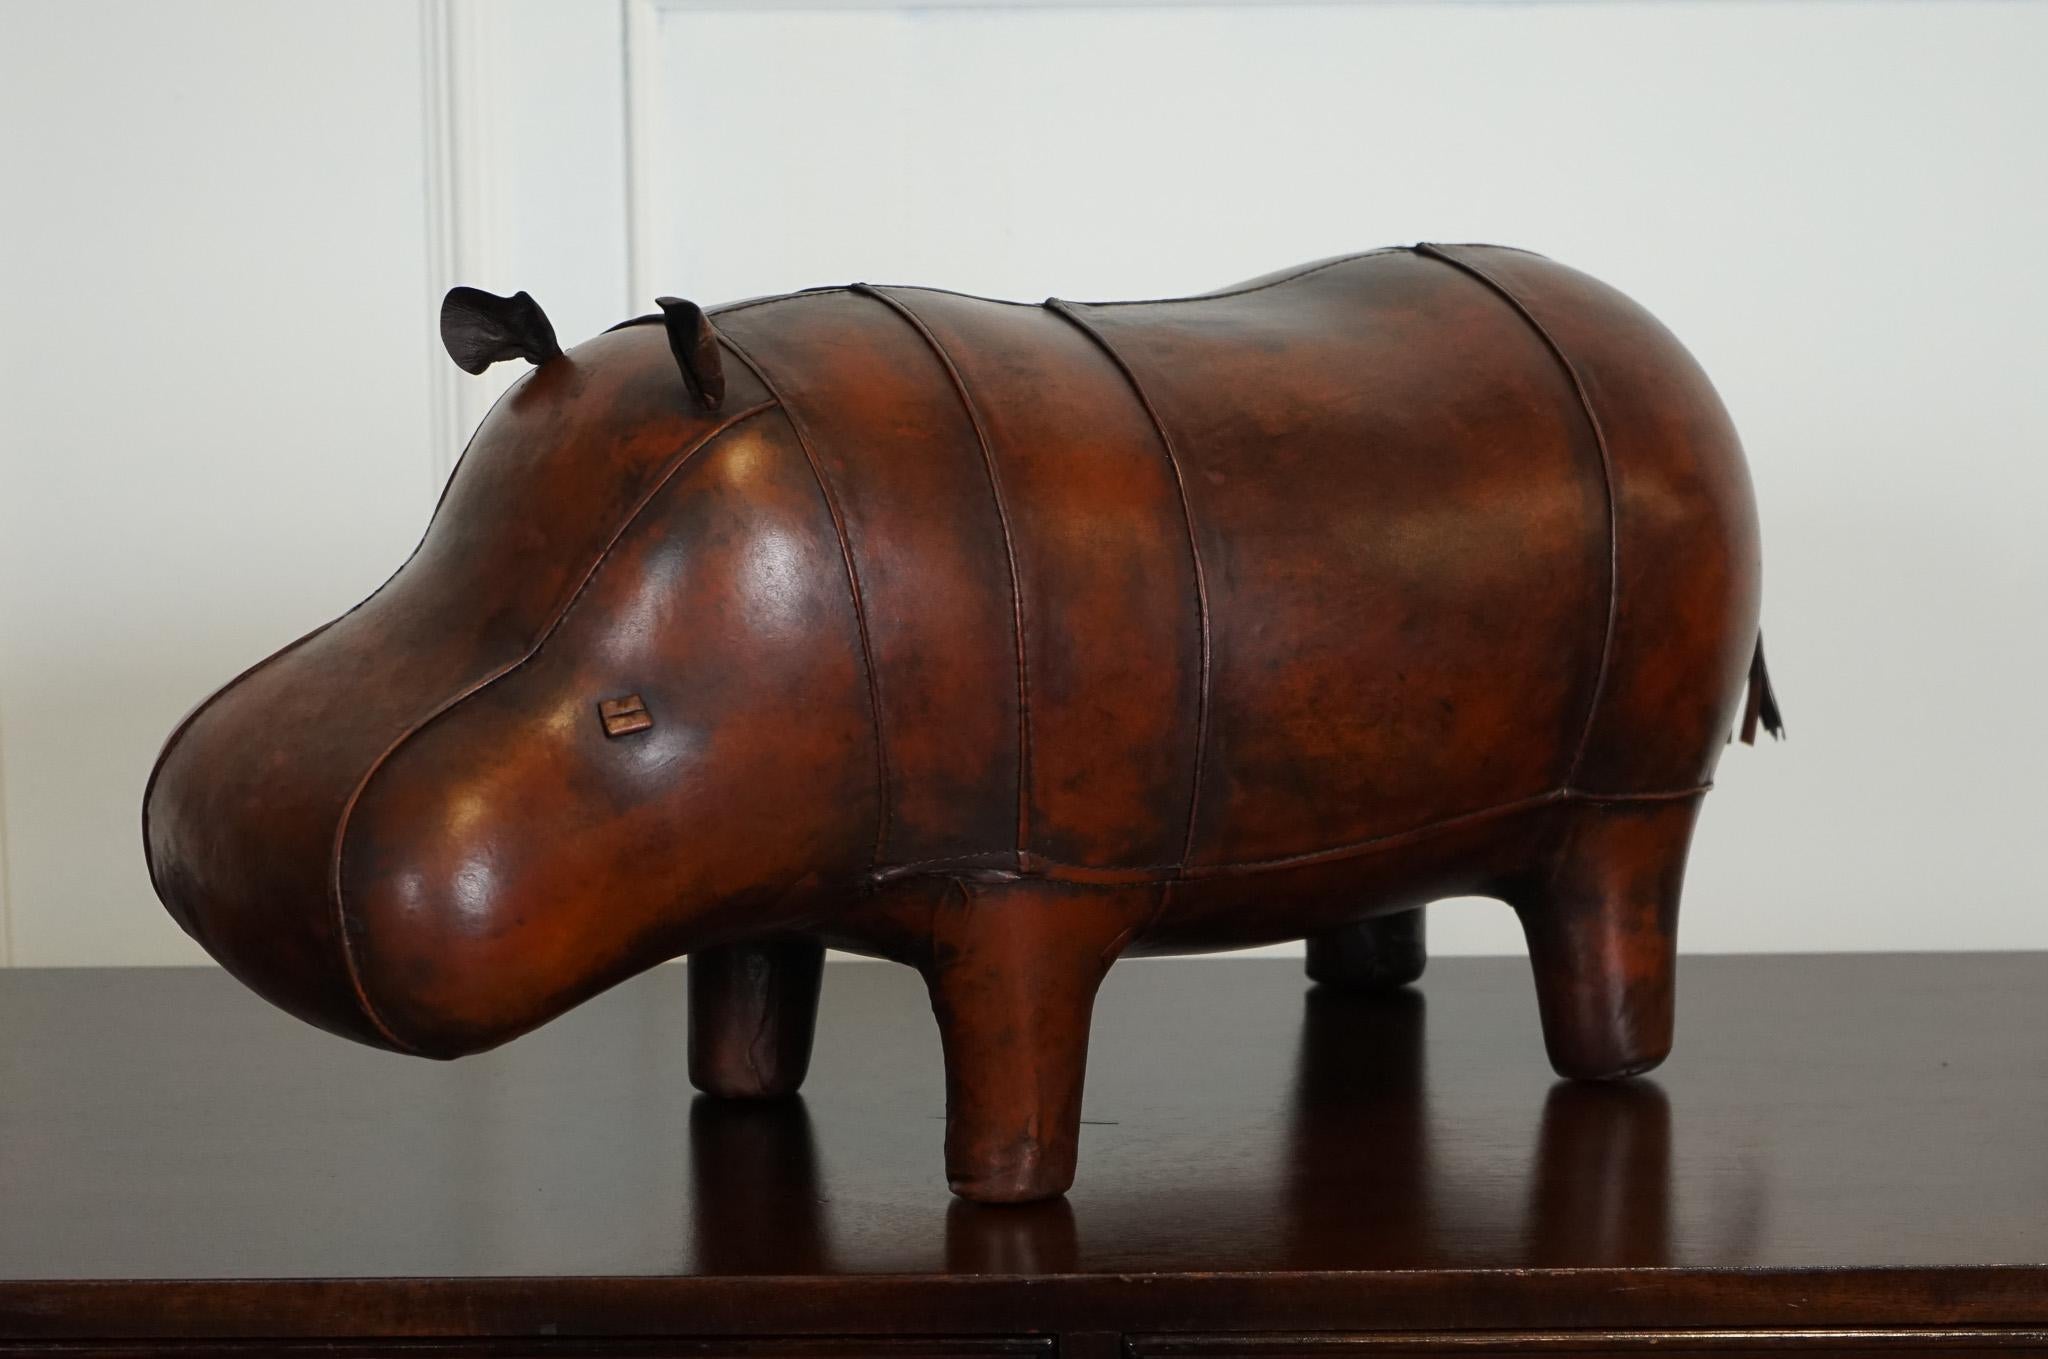 
Antiques of London



We are delighted to offer for sale this Liberty London Style Omersa Antique Brown Leather Hippo.

The Liberty London Style Omersa 'Antique Brown' Leather Footstool Hippo is a unique and charming piece that adds a touch of